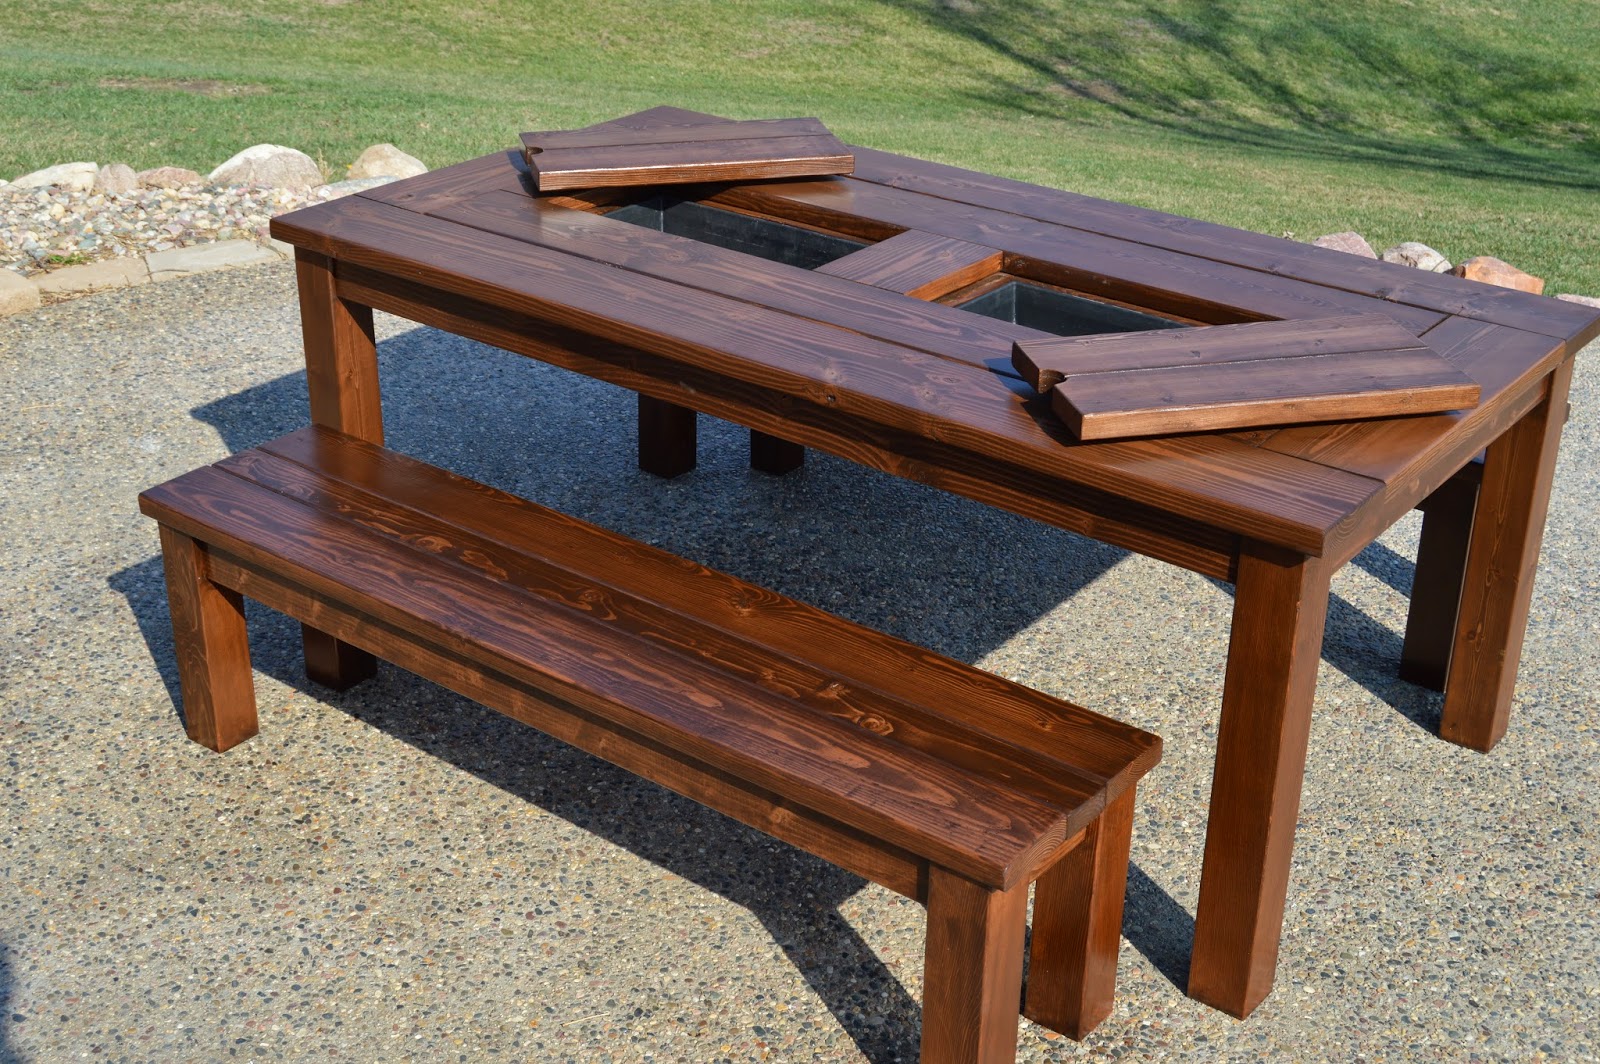 KRUSE'S WORKSHOP: Step by Step Patio Table Plans - With Built-In 